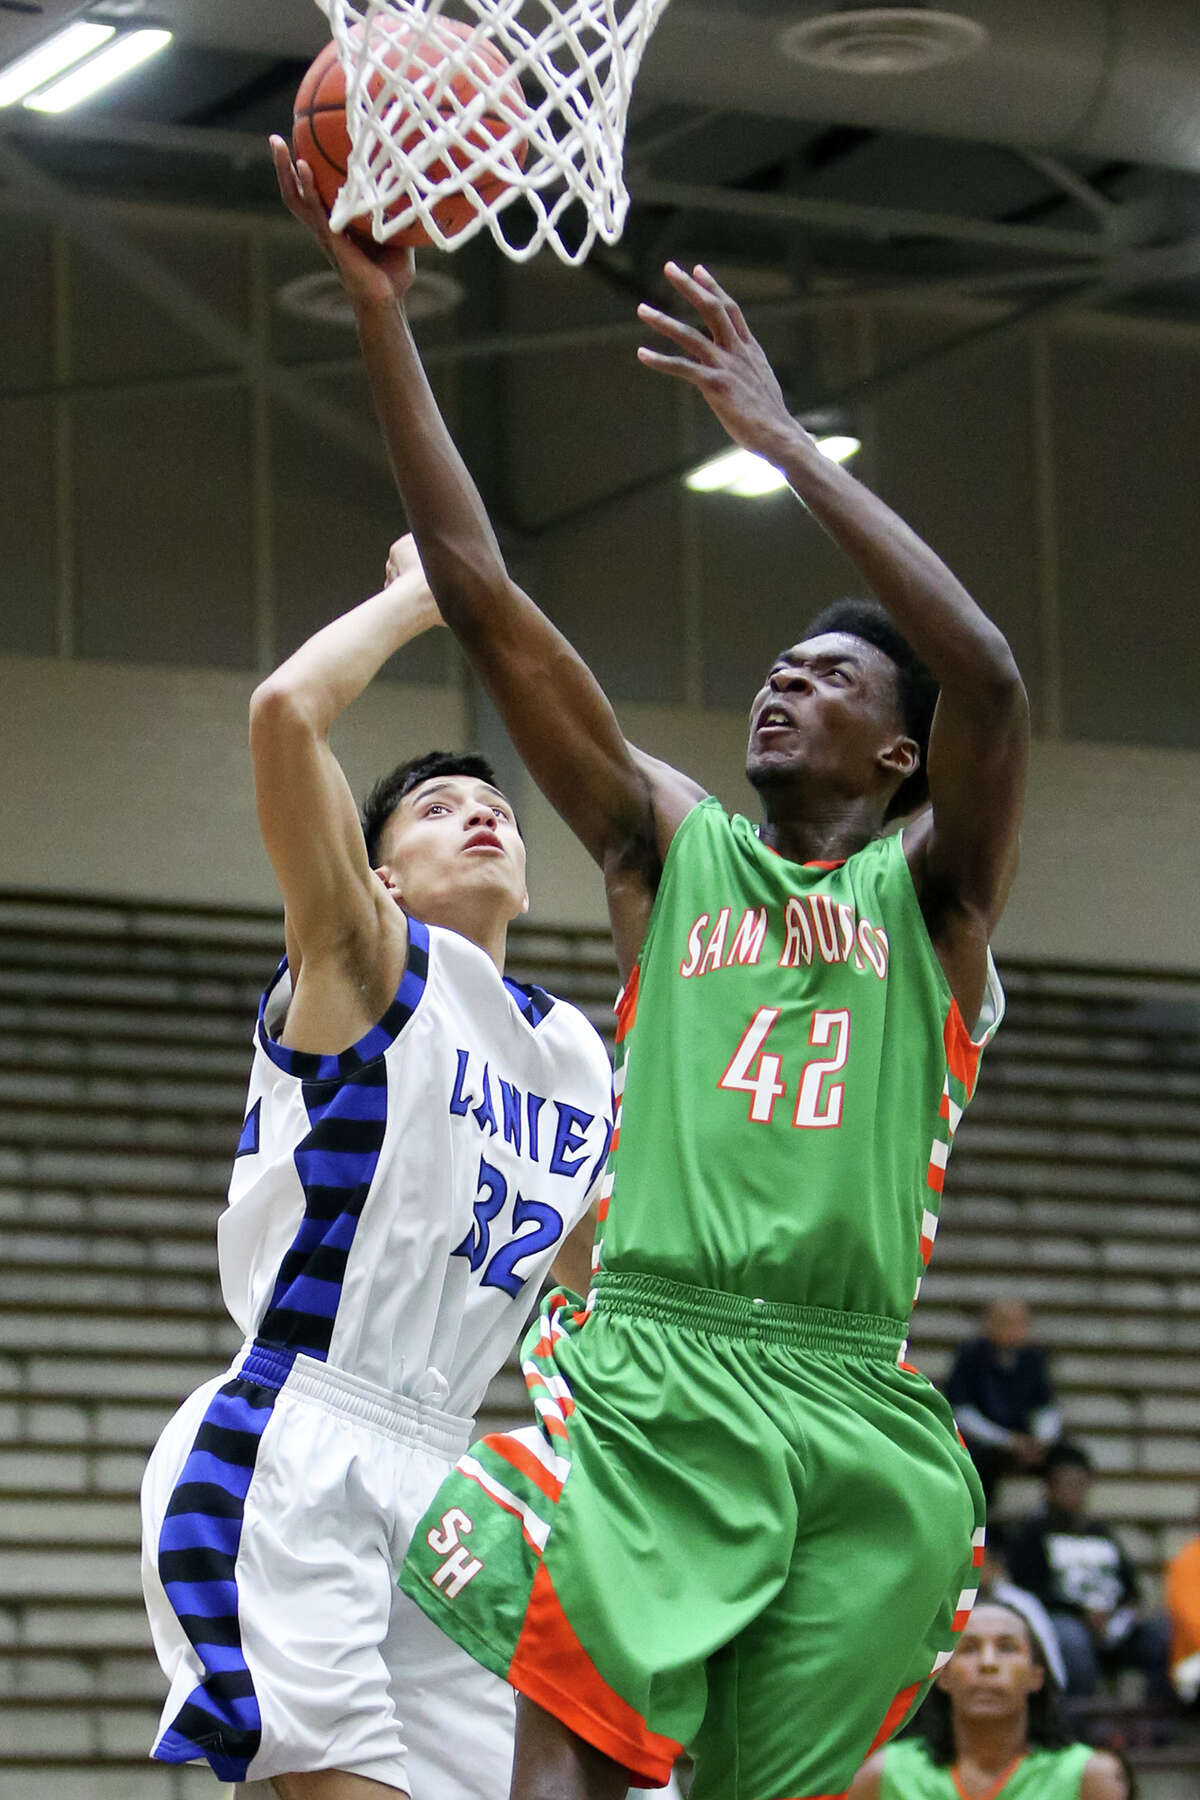 Sam Houston's Devin Allen (42) goes to the basket past Lanier's Luis Martinez (32) during the first half of their game at the Alamo Convocation Center on Friday, Feb. 13, 2015. Allen led all scorers with 20 points to help Sam Houston beat Lanier 72-60, handing the Voks their first district 28-5A loss. MARVIN PFEIFFER/ mpfeiffer@express-news.net